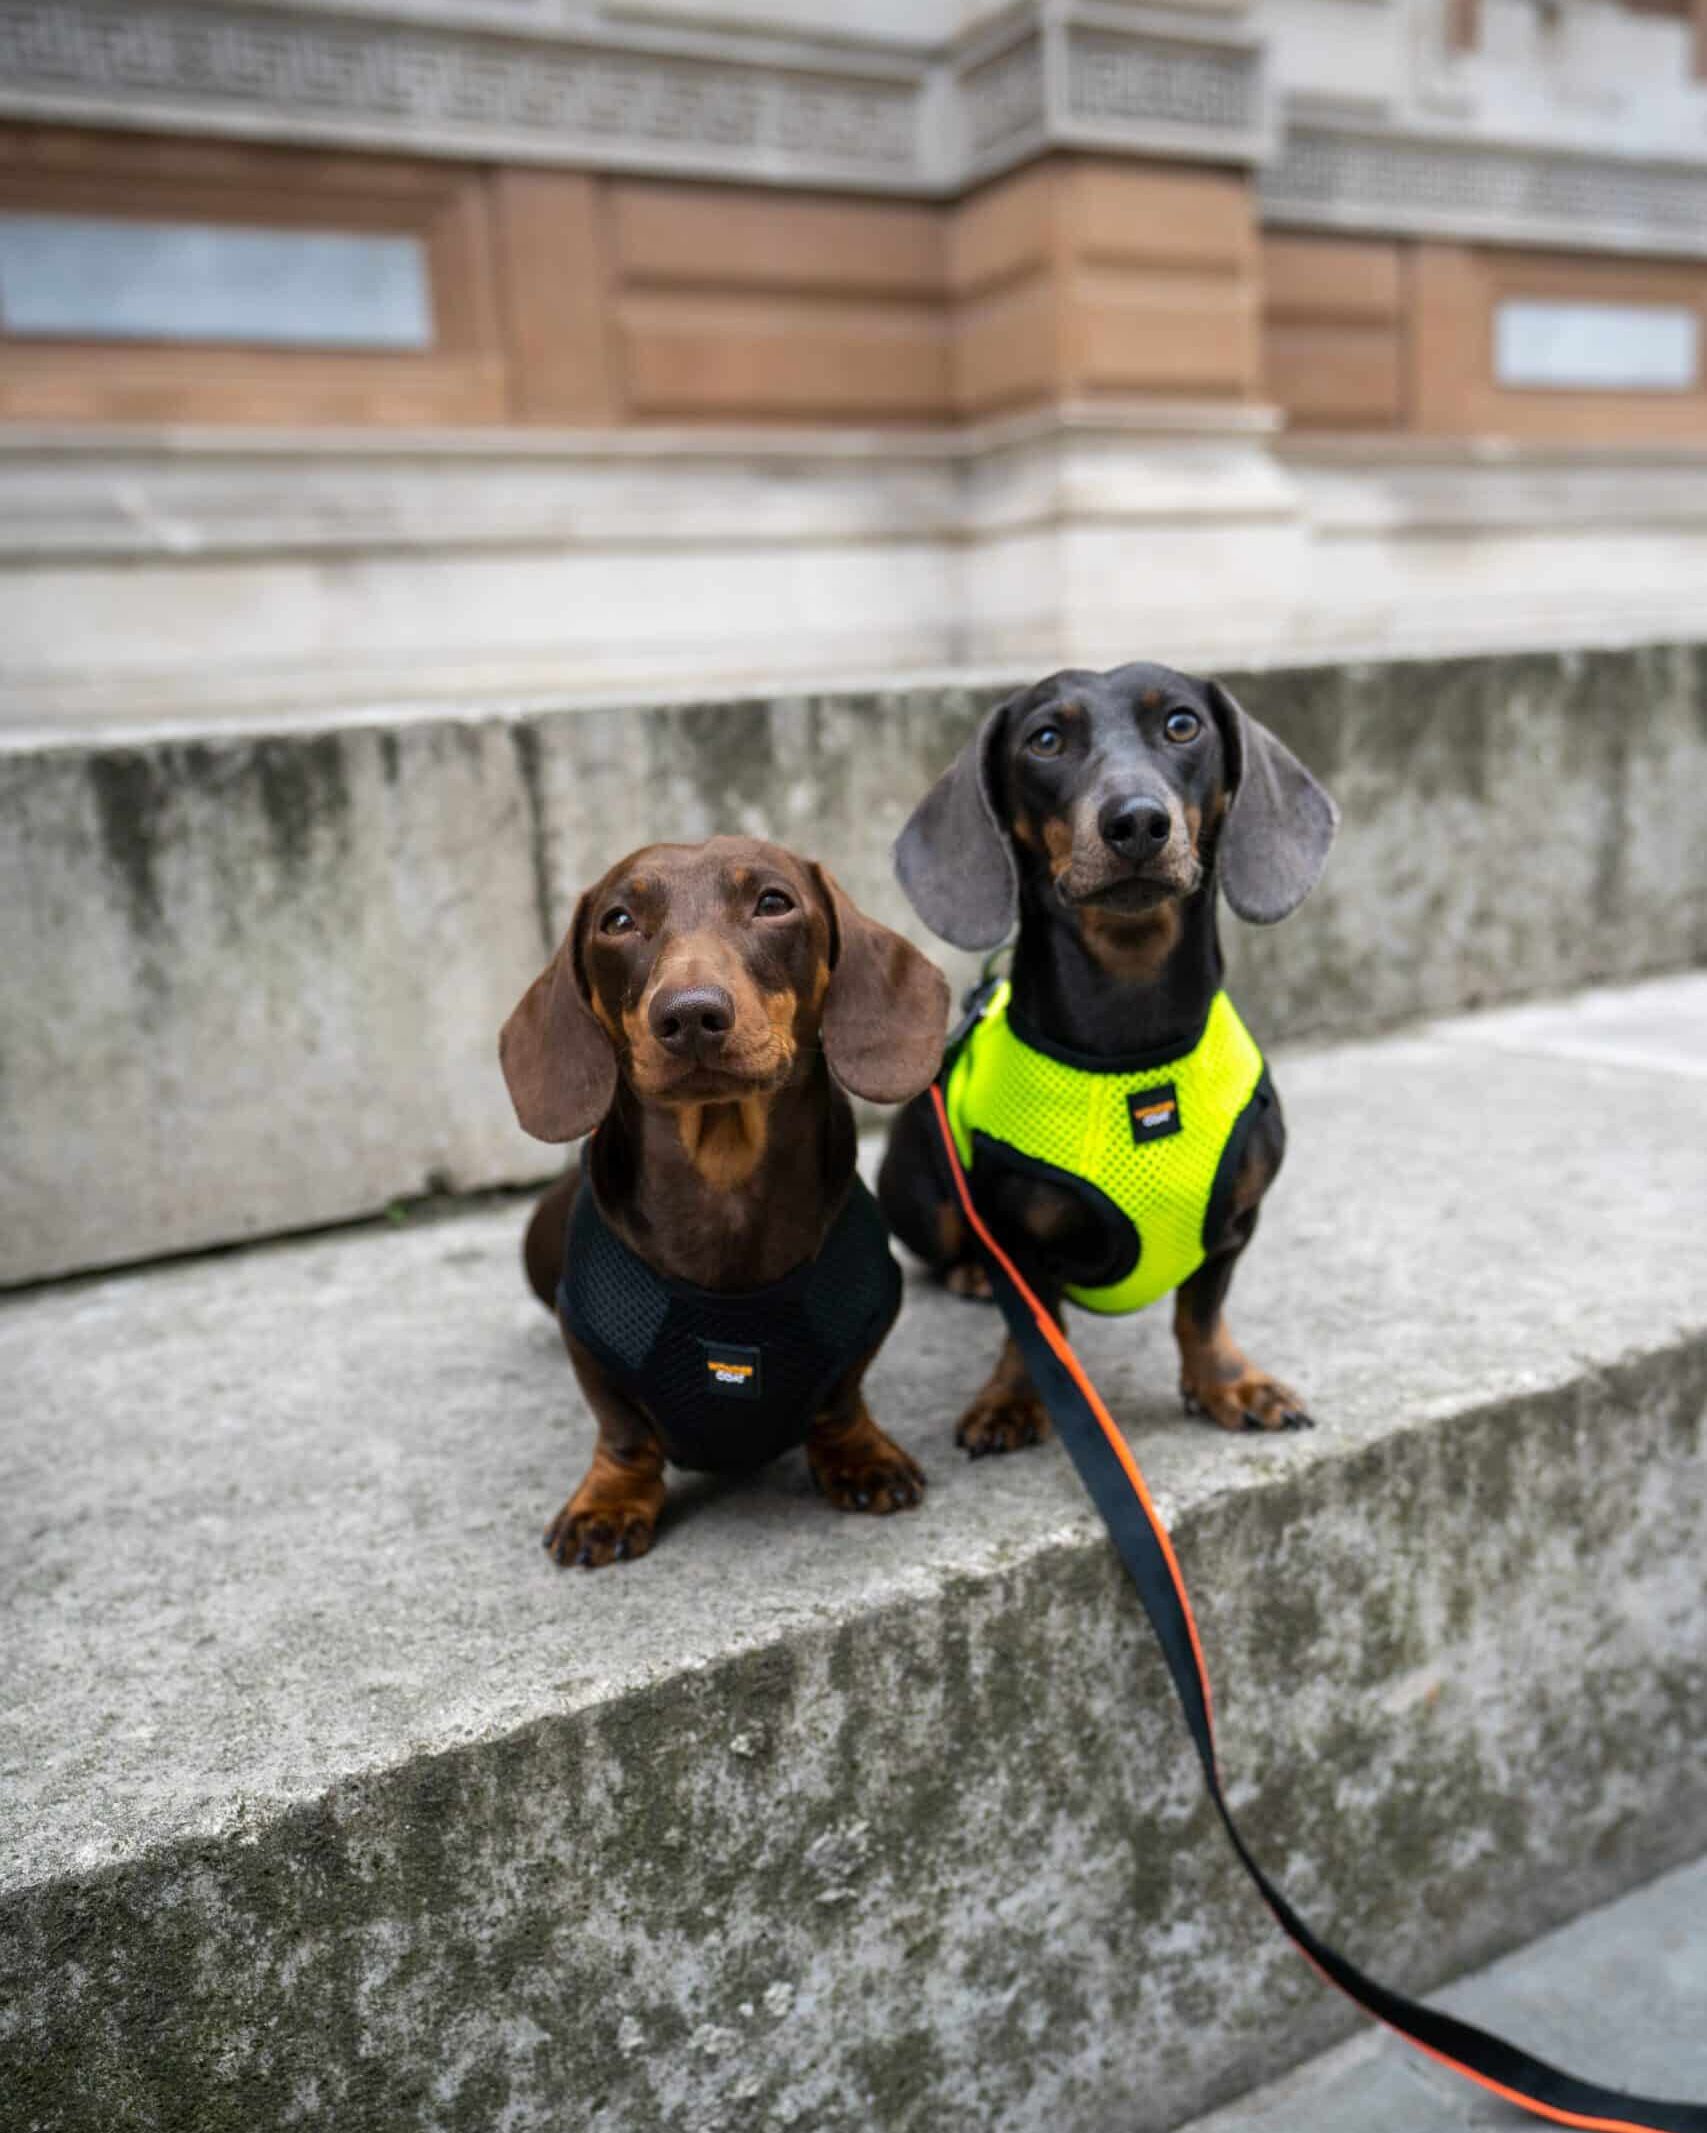 Two dachshunds wearing Wondercoat Technical fleece and harness in black and yellow